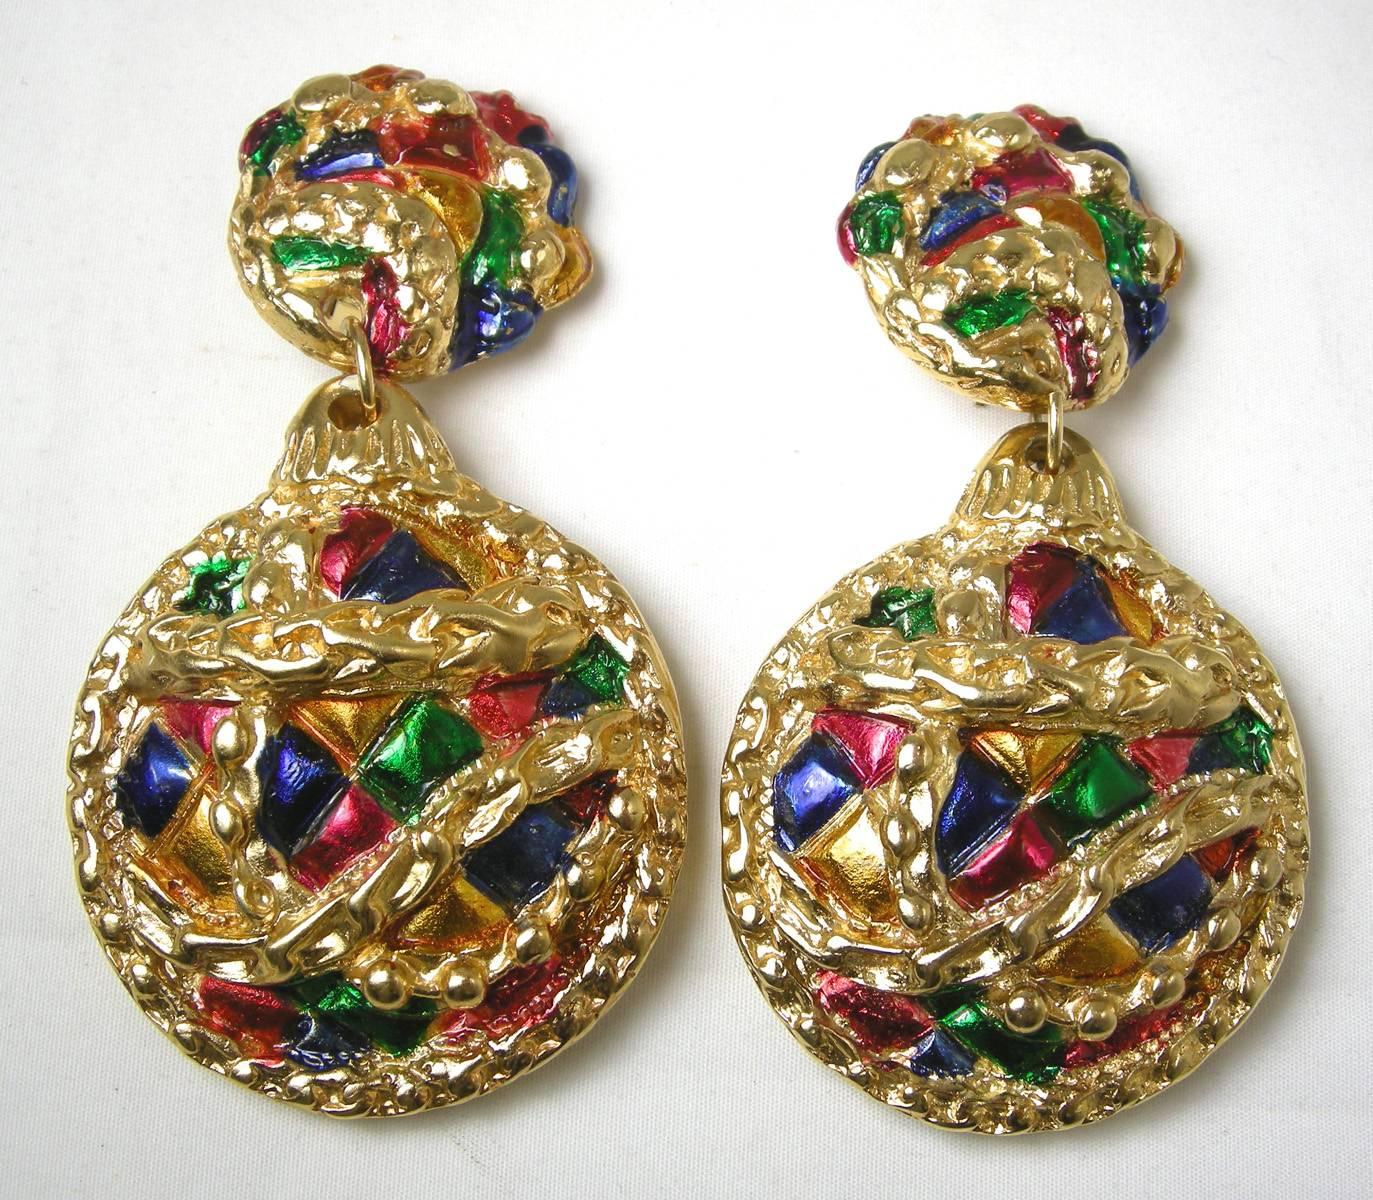 These are a pair of amazing Jacky De G dangling earrings that has a intricate 3-dimensional design combining enameling and a gold tone setting. It has green, red, orange and yellow enameling with a swirl design. It measures 3-1/2” x 2”. It is signed